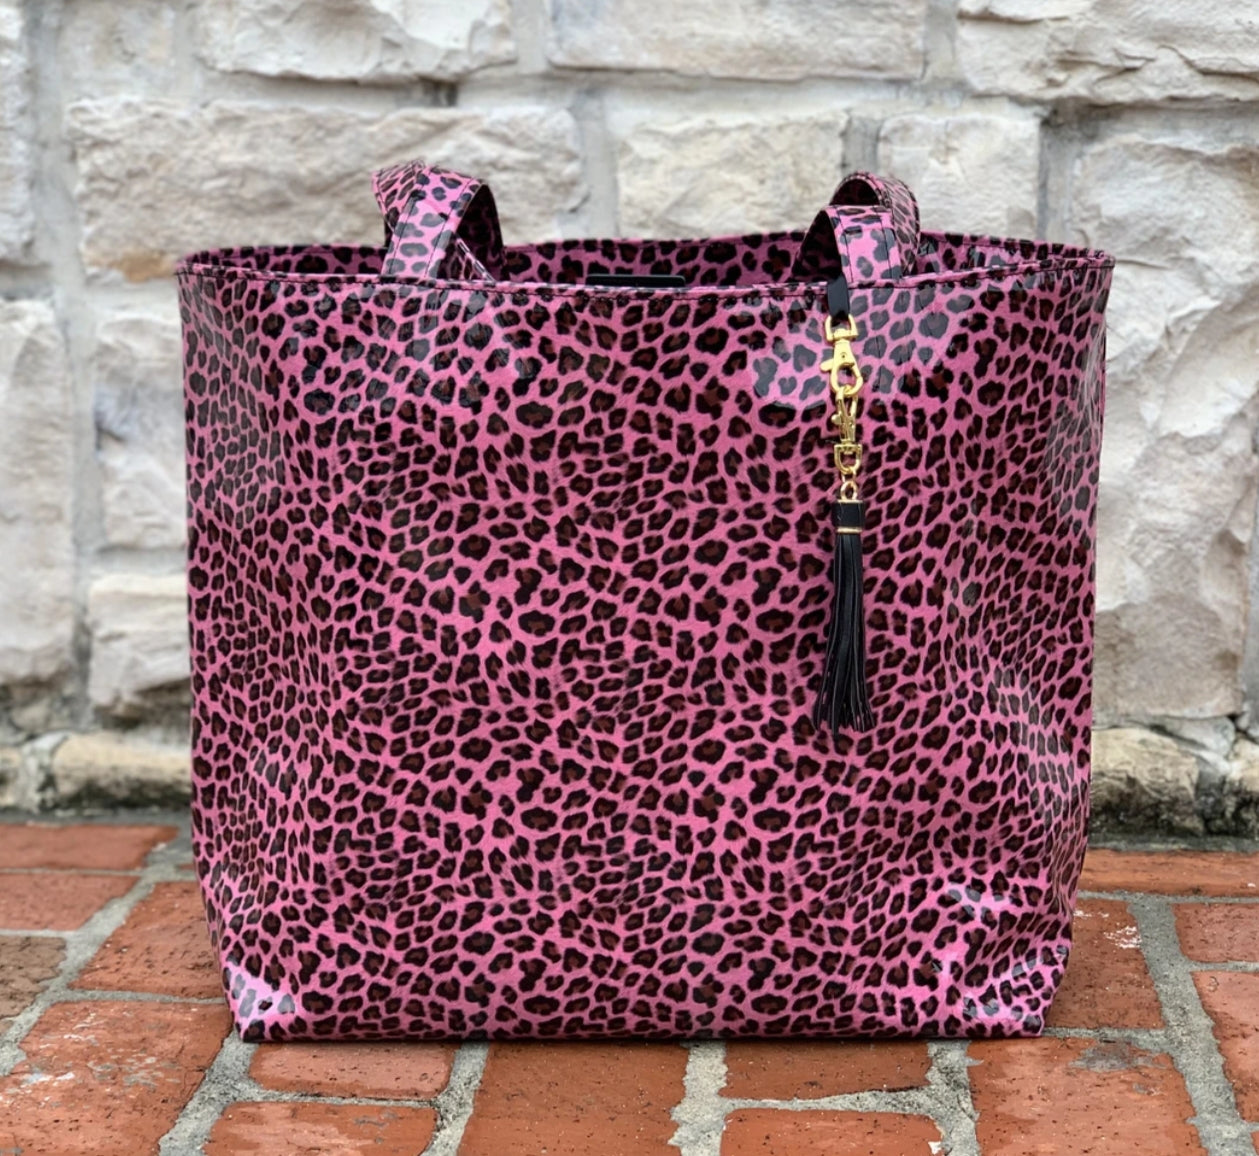 Patent Pink Leopard Tote by Makeup Junkie Bags